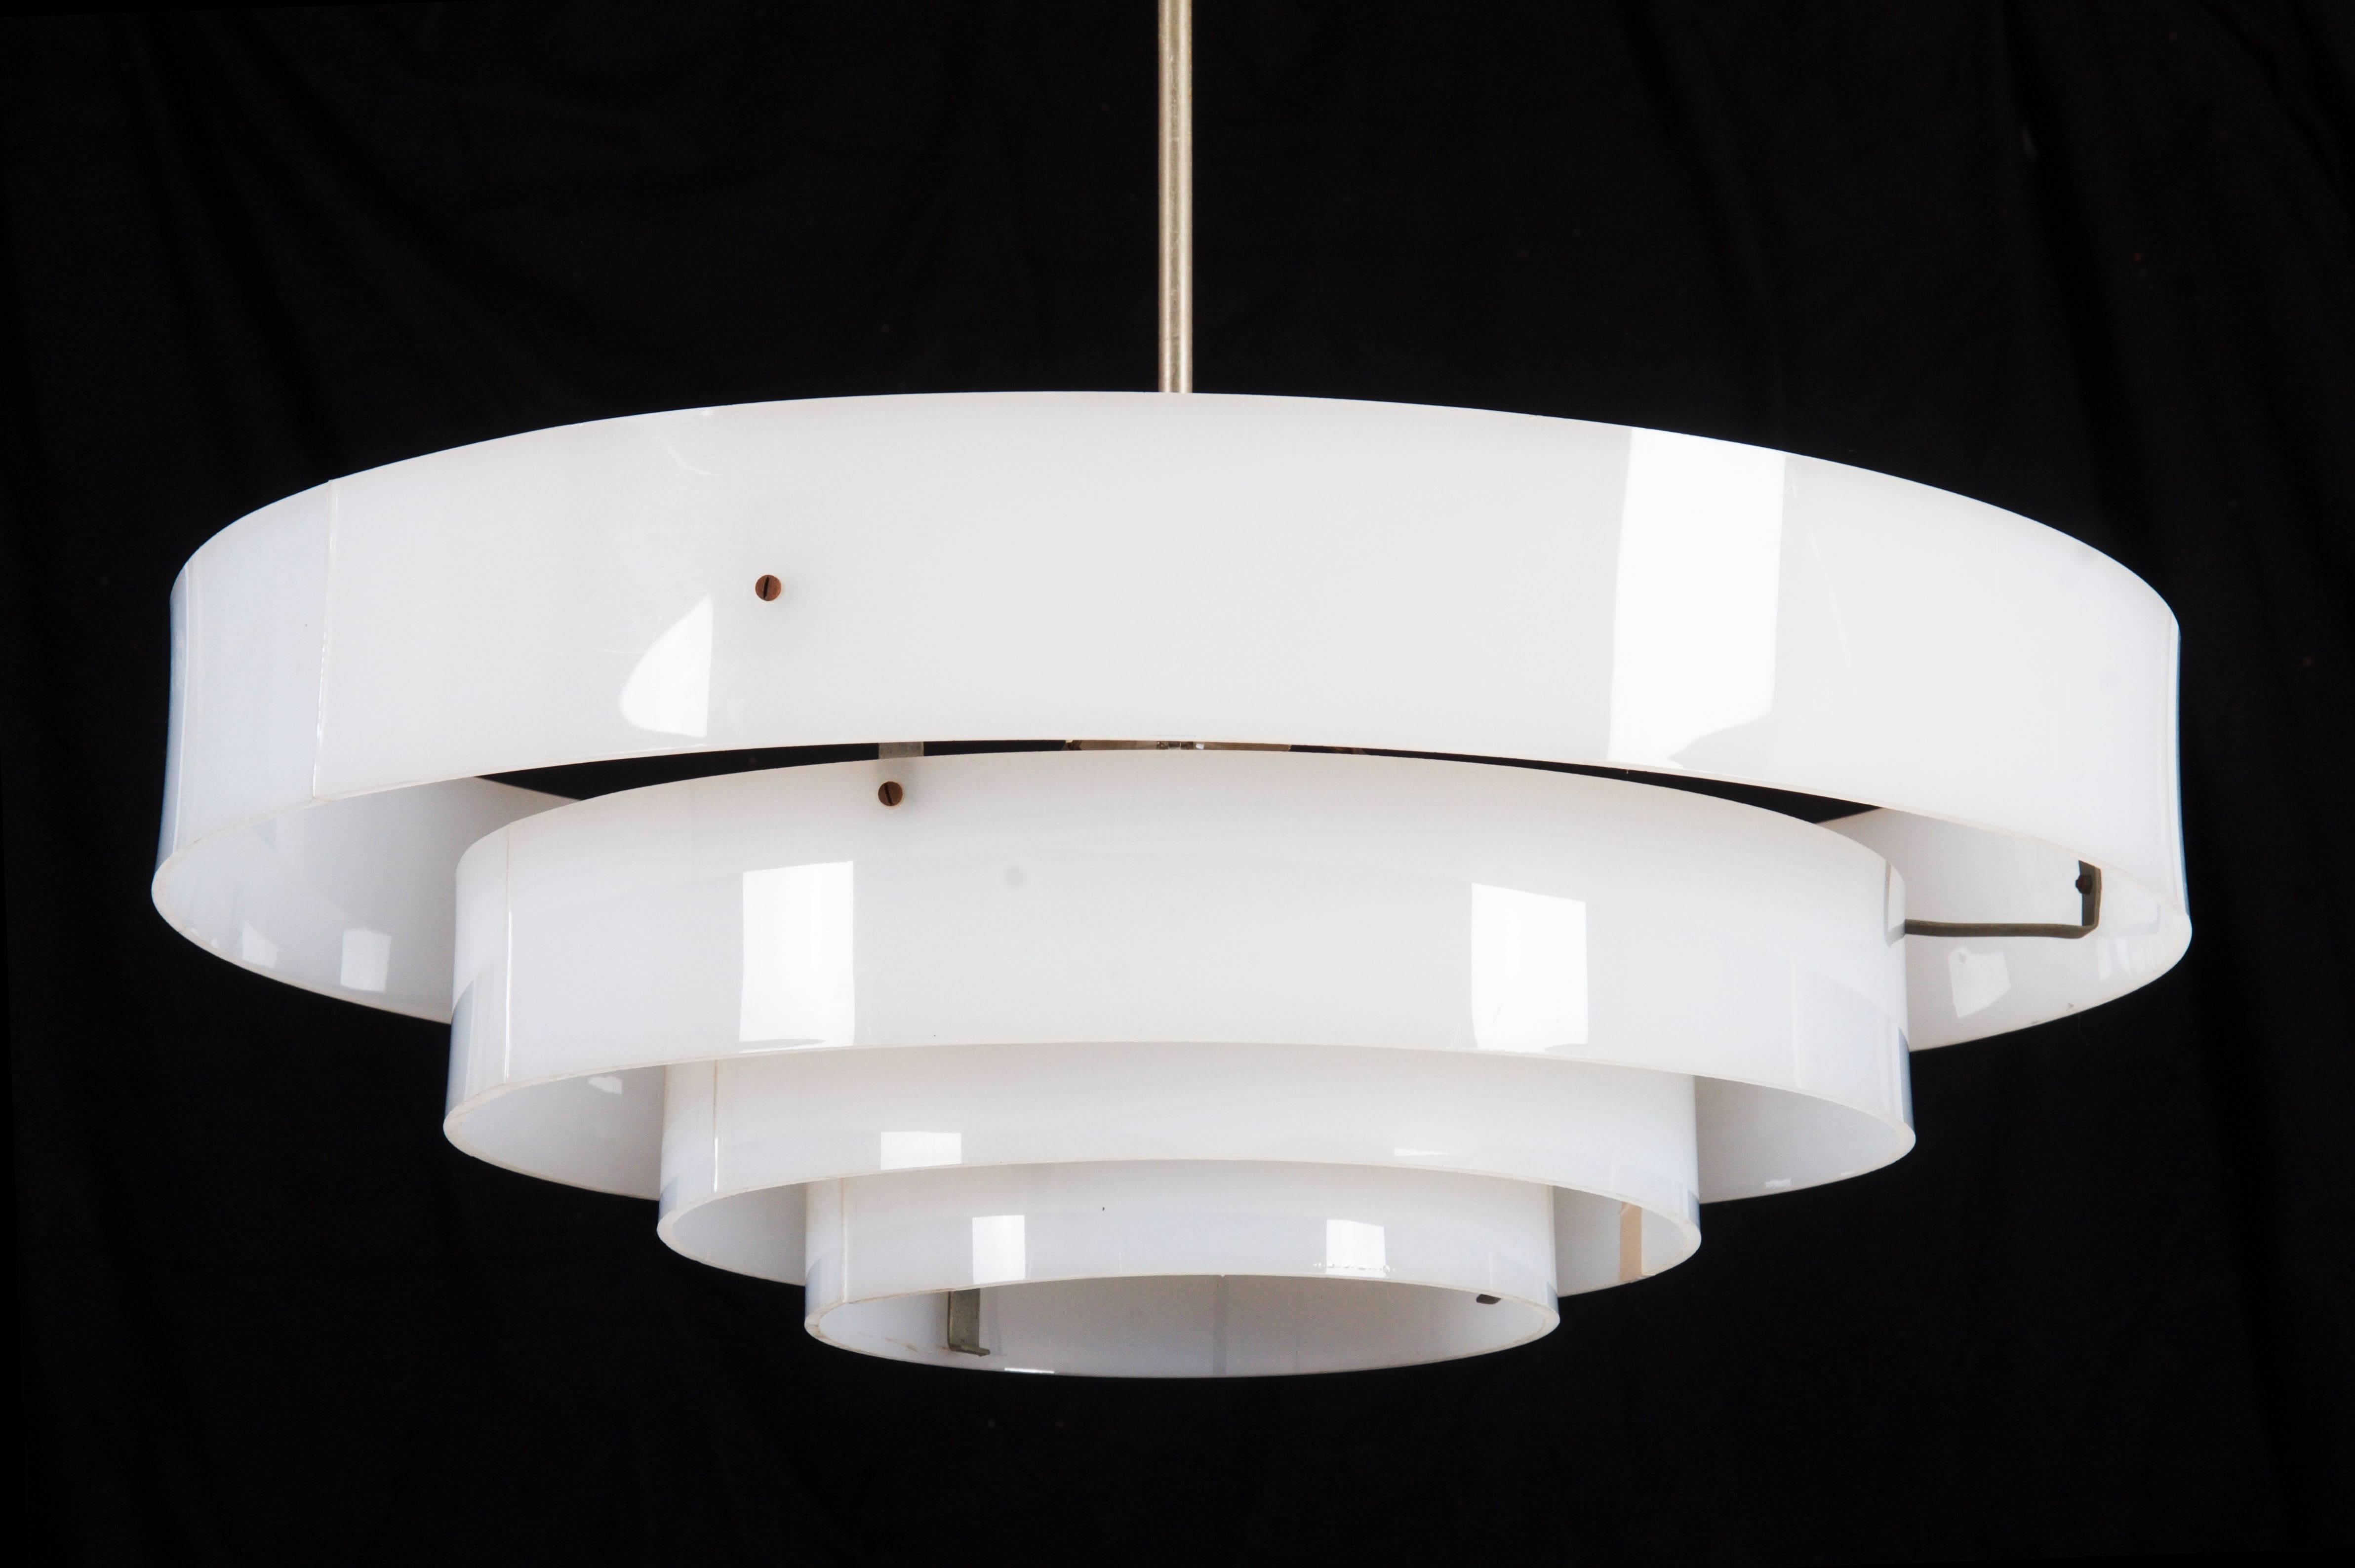 Four white plastic rings fitted with one E27 sockets.
Three pieces available immediately, 60 pieces of the lamp shapes available but without the suspension.